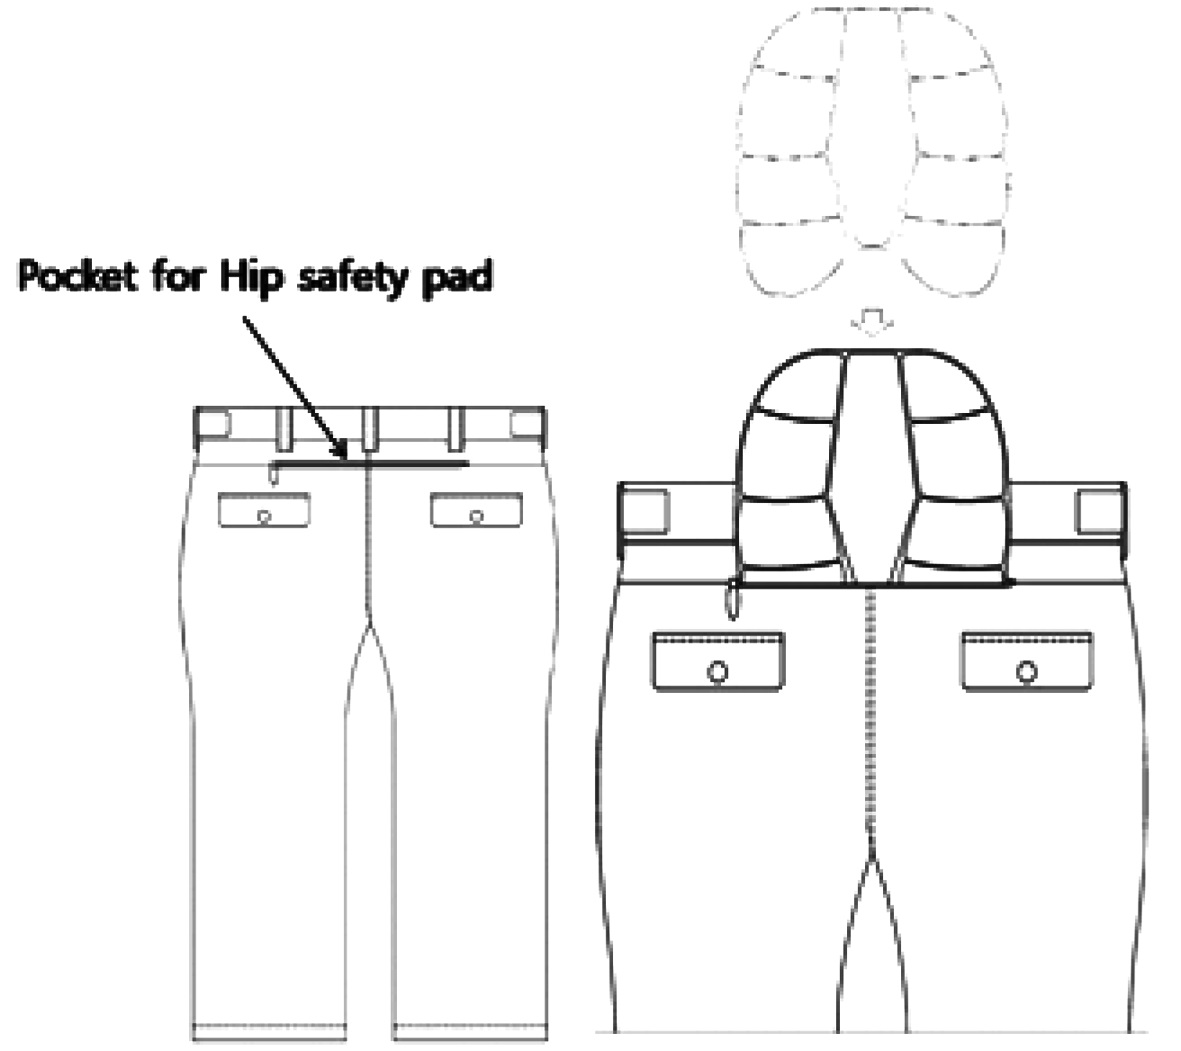 The pants with safety pad (Back side).